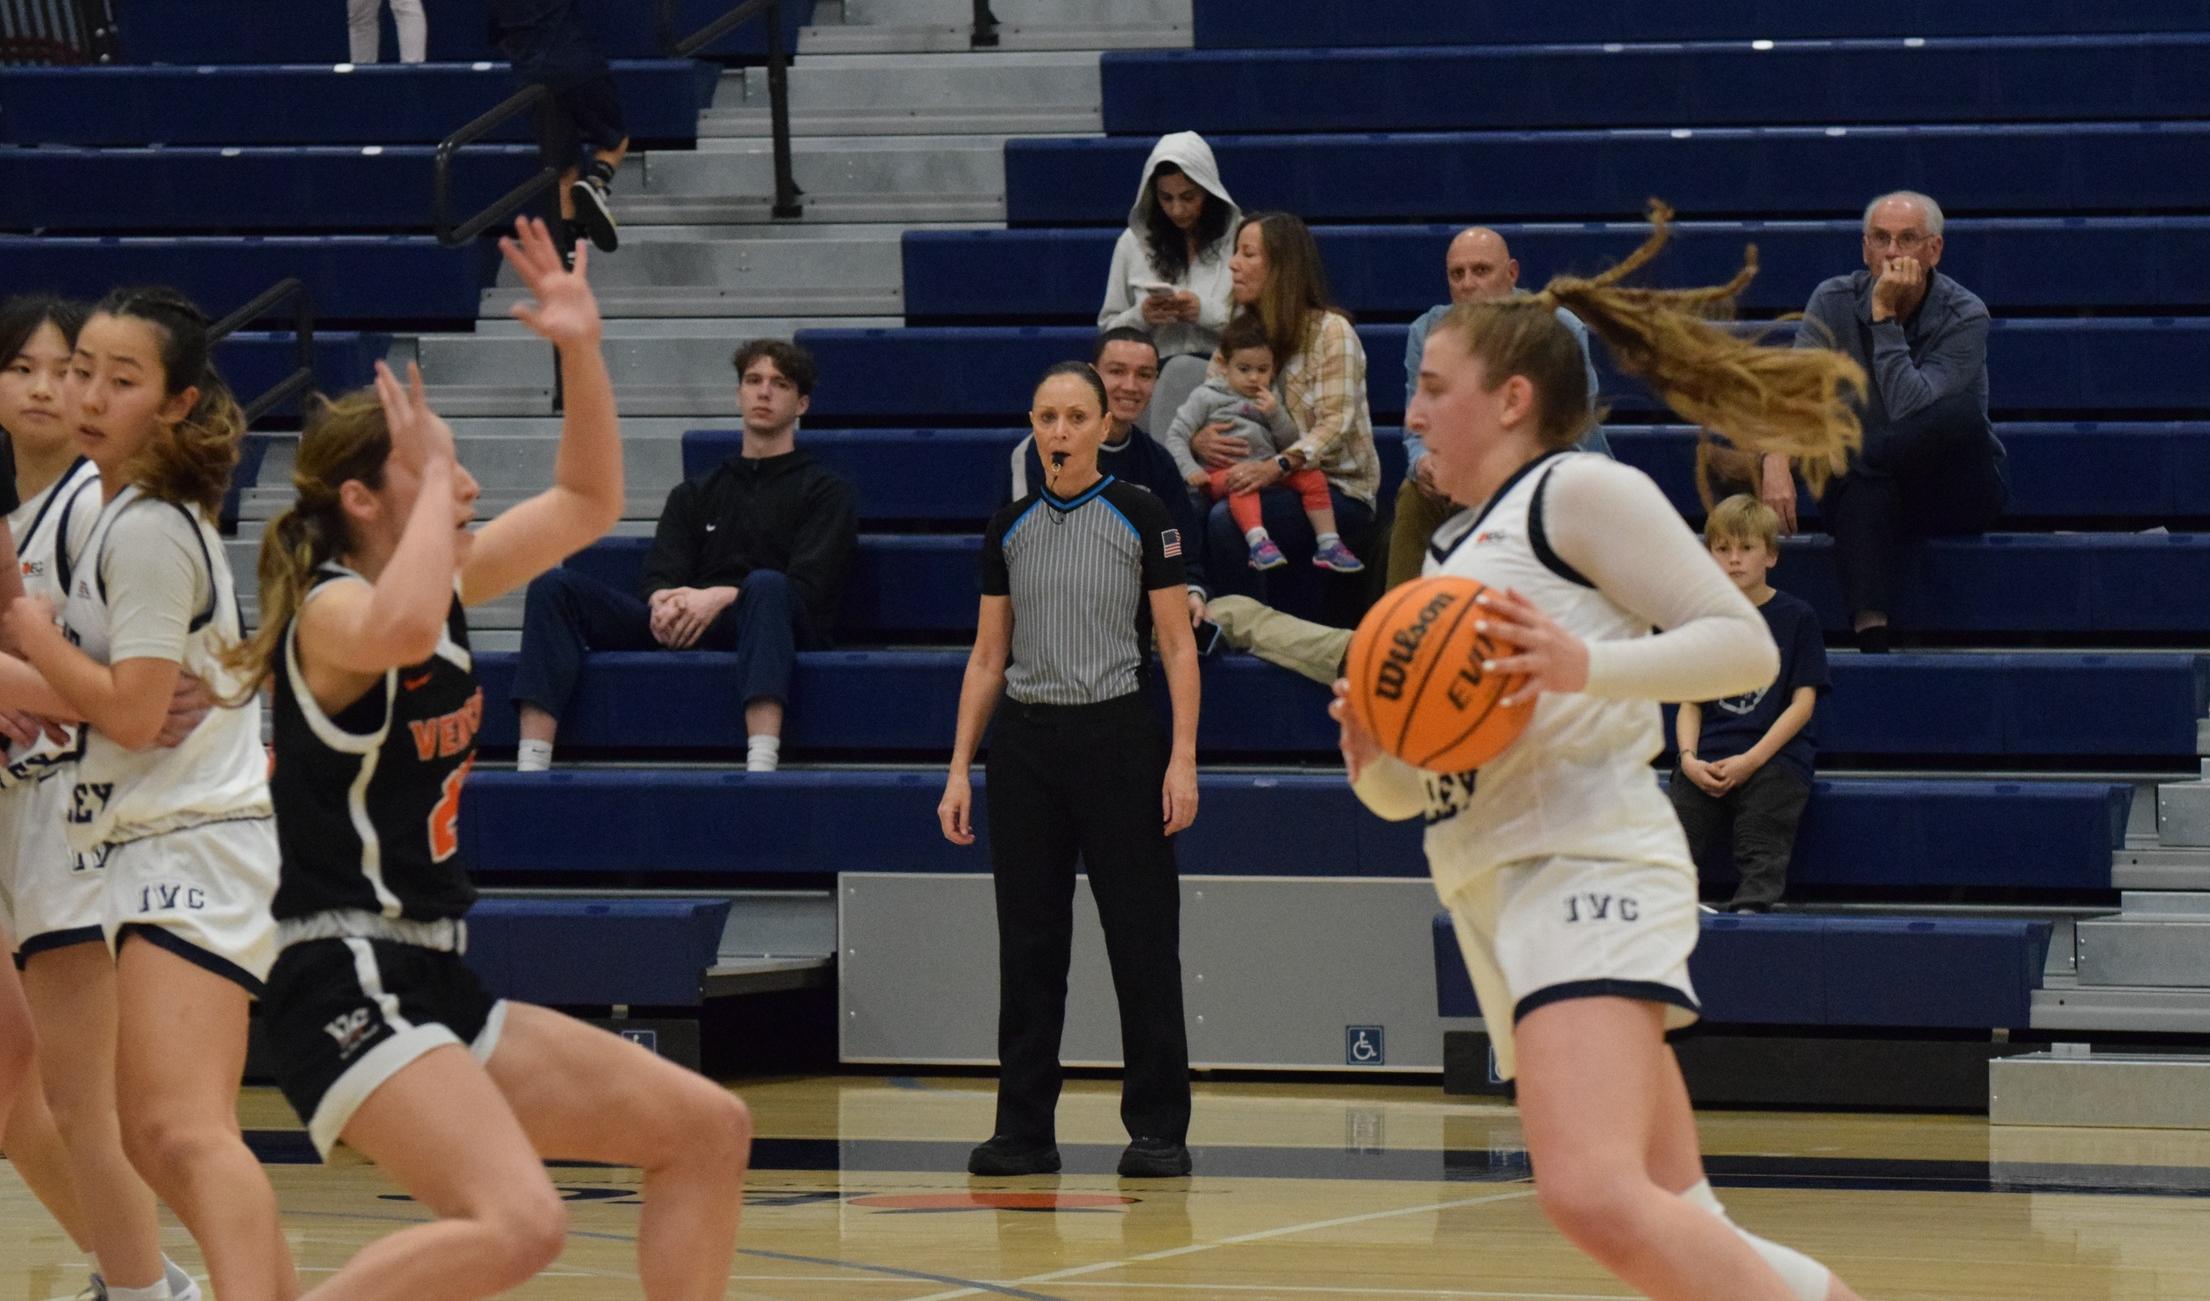 Women's basketball season ends in second round of playoffs